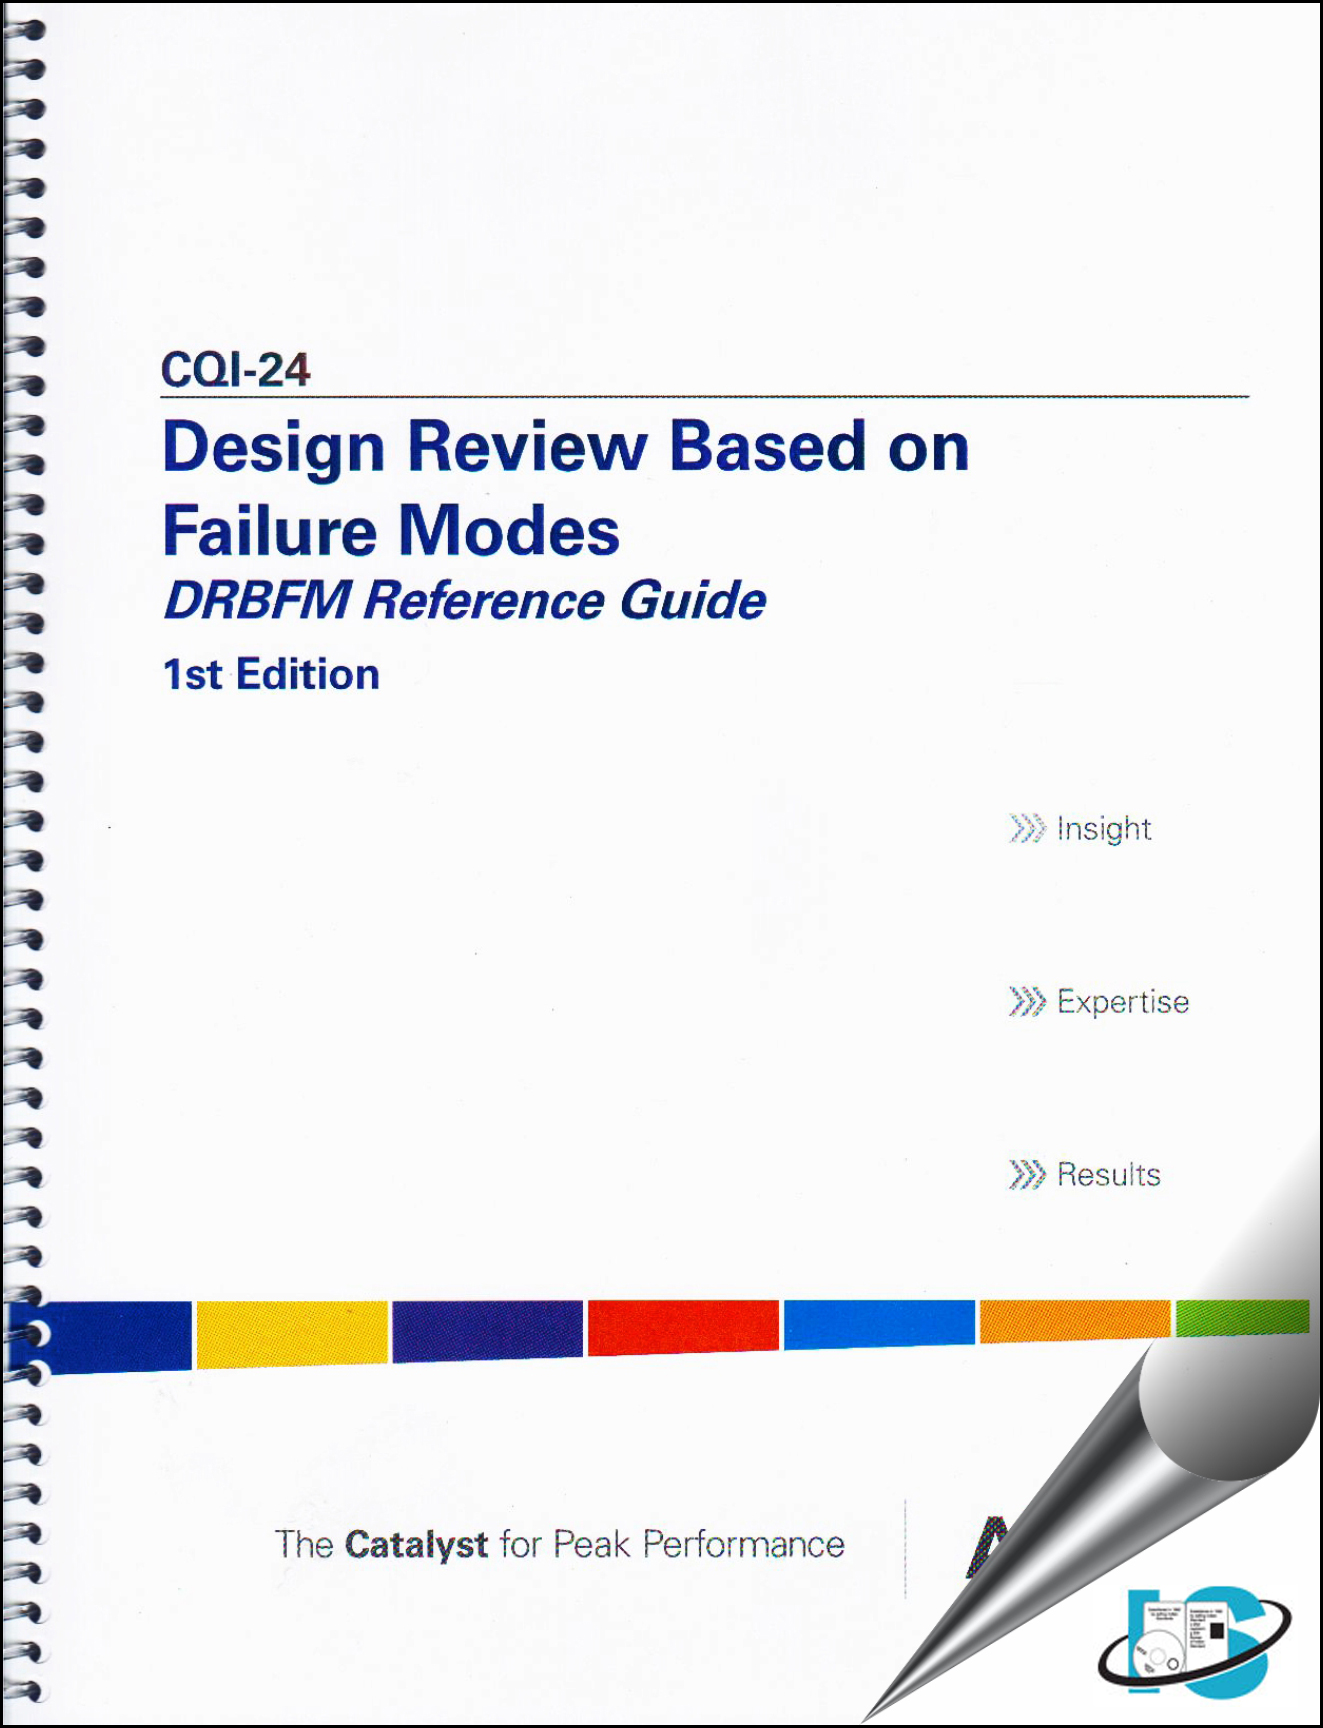 Cqi 24 Design Review Based On Failure Modes Drbfm Reference Guide 1st Edition Aiag